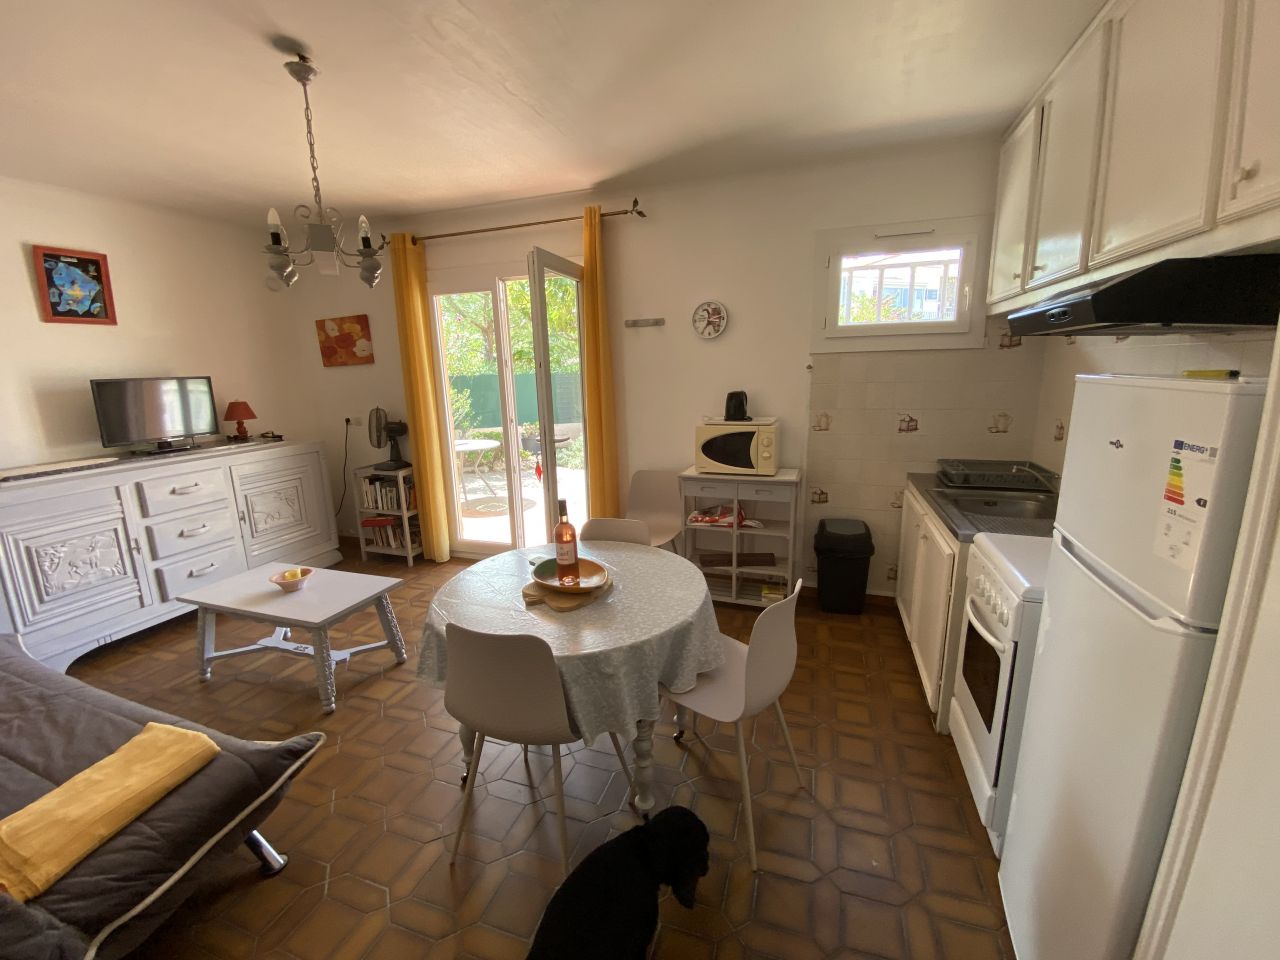 Location appartement Le Baracrs N°8304 image 2